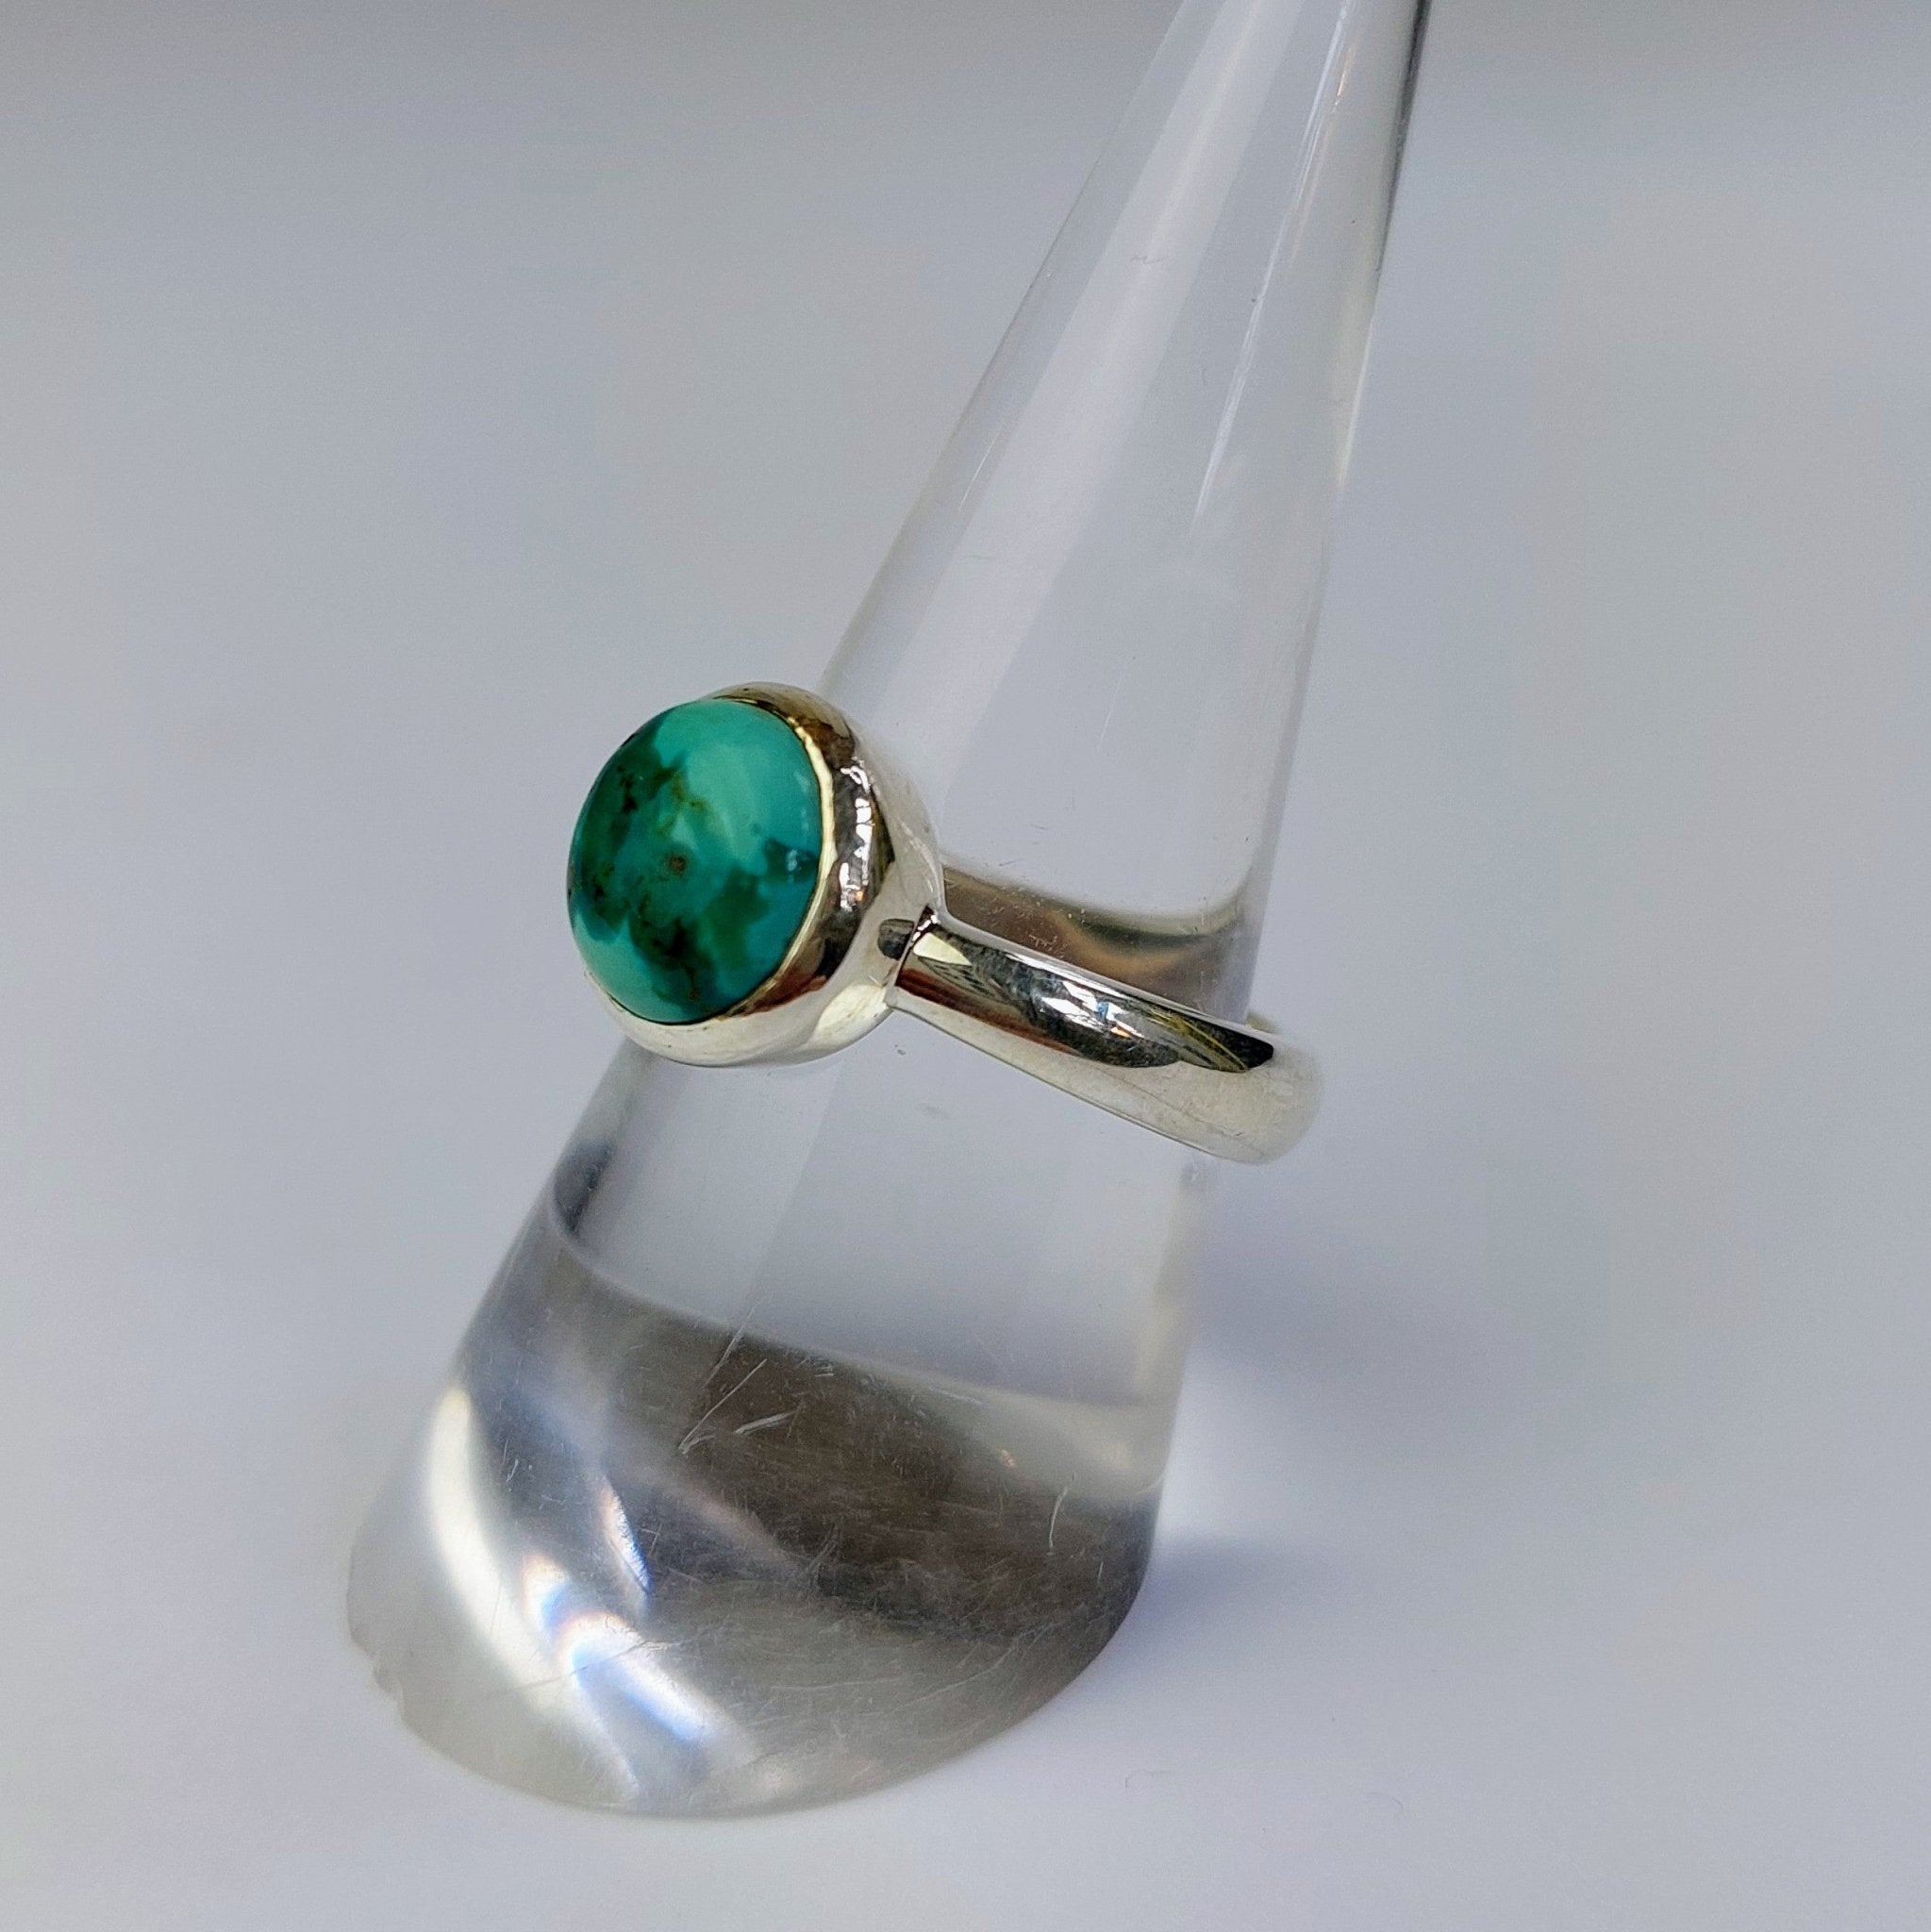 Turquoise Ring - The Nancy Smillie Shop - Art, Jewellery & Designer Gifts Glasgow